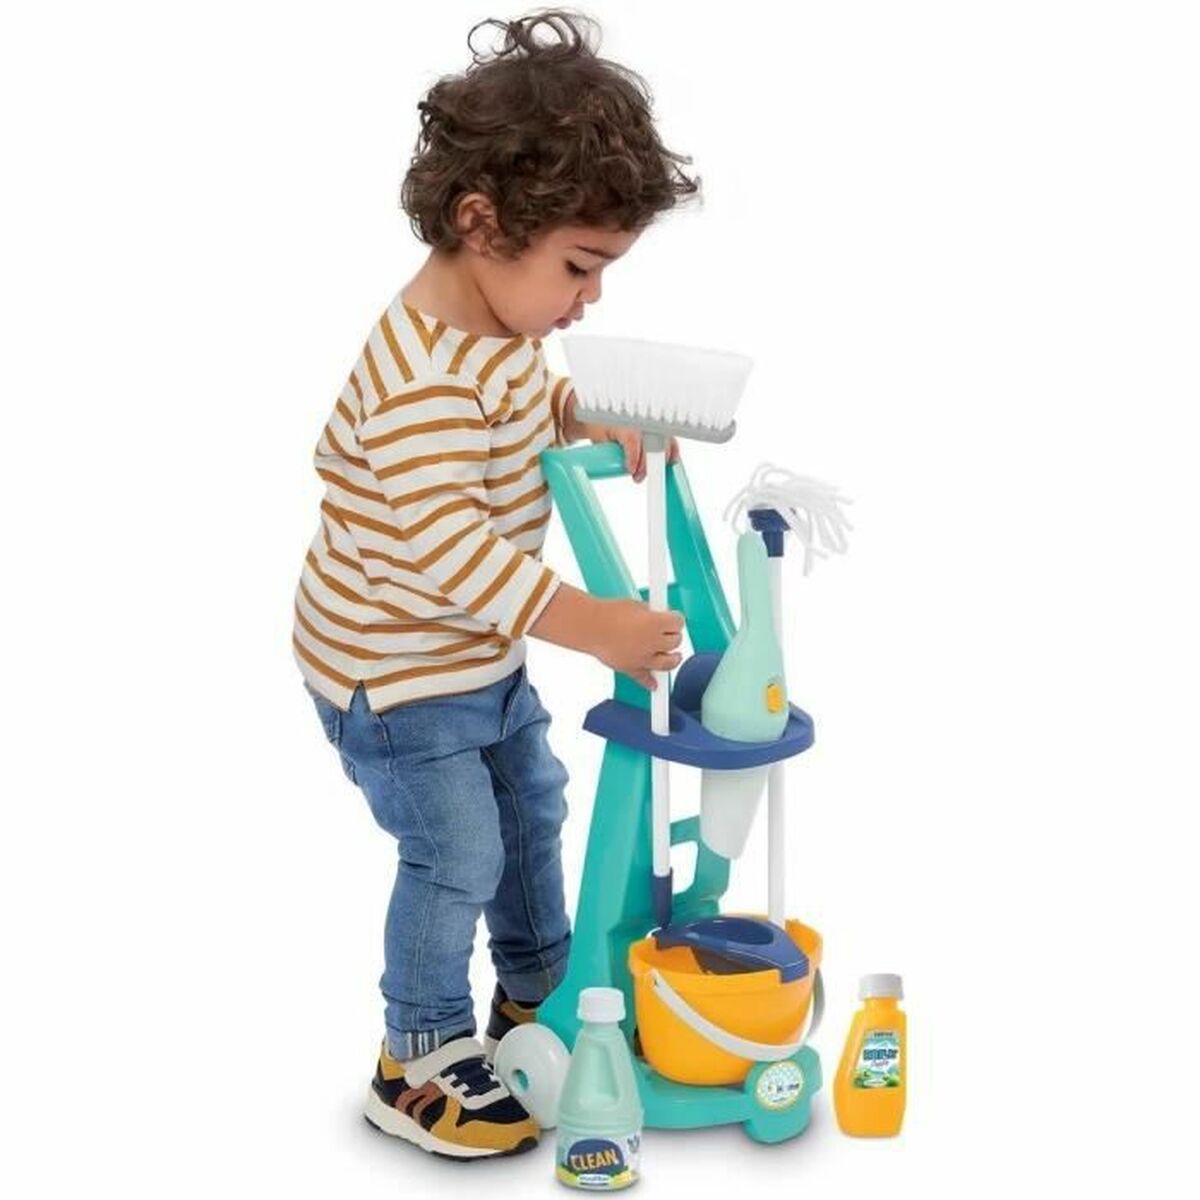 Cleaning & Storage Kit Ecoiffier Clean Home Toys